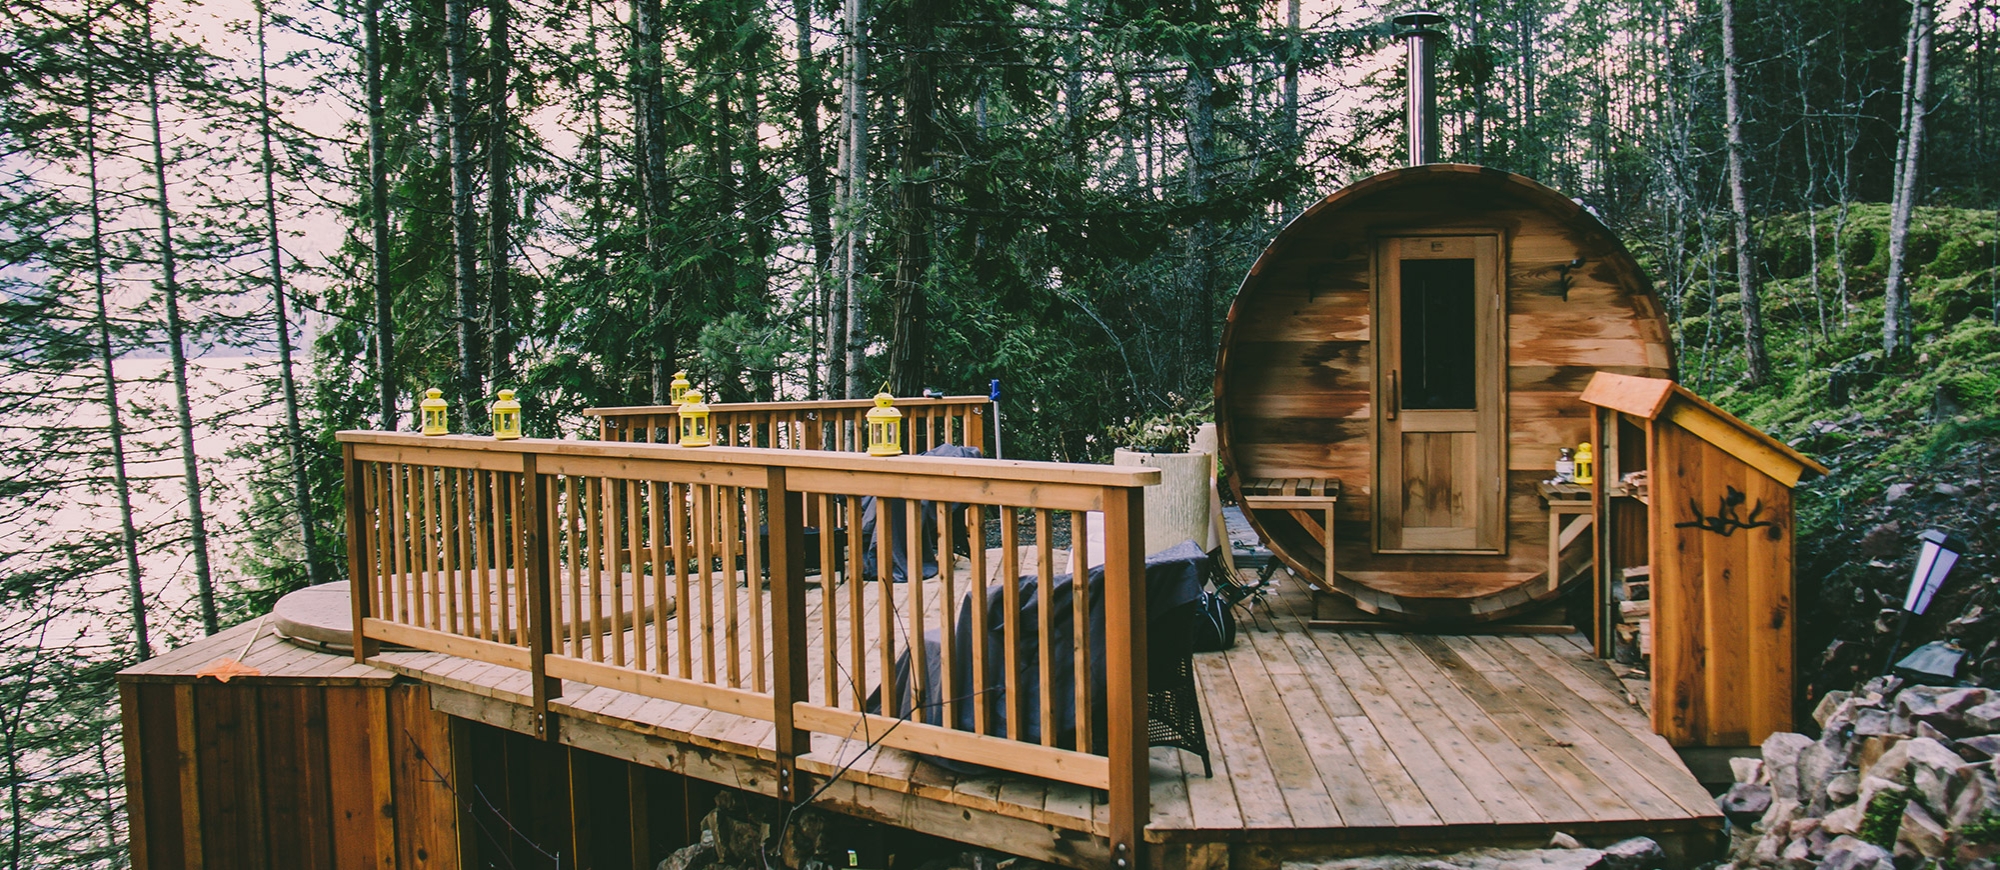 A cylindrical cabin next to a hot tub set into a wooden deck, overlooking Kootenay Lake